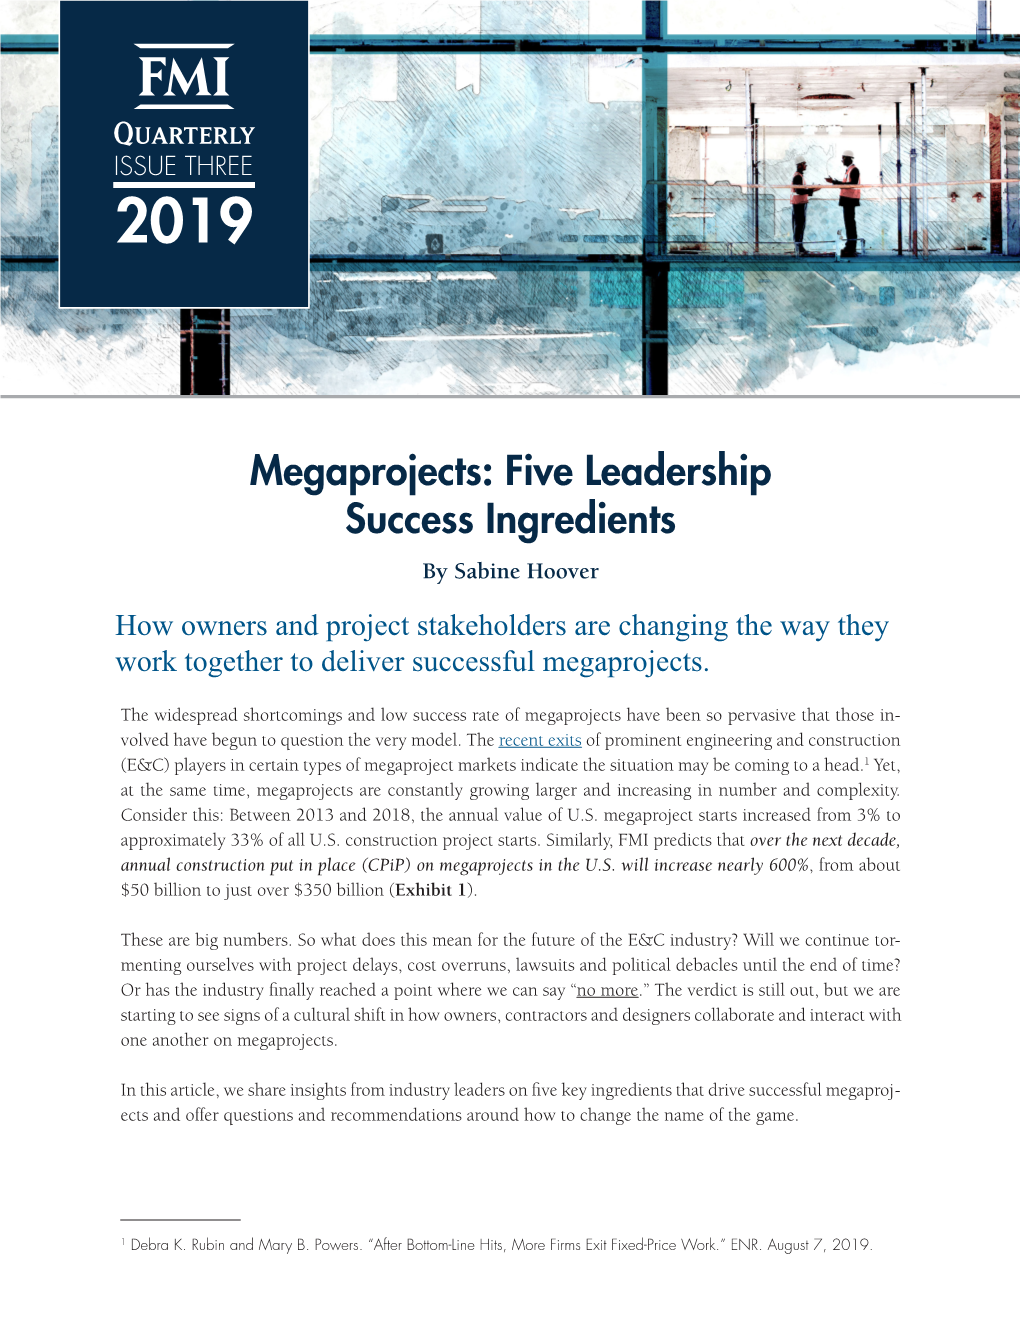 Megaprojects: Five Leadership Success Ingredients by Sabine Hoover